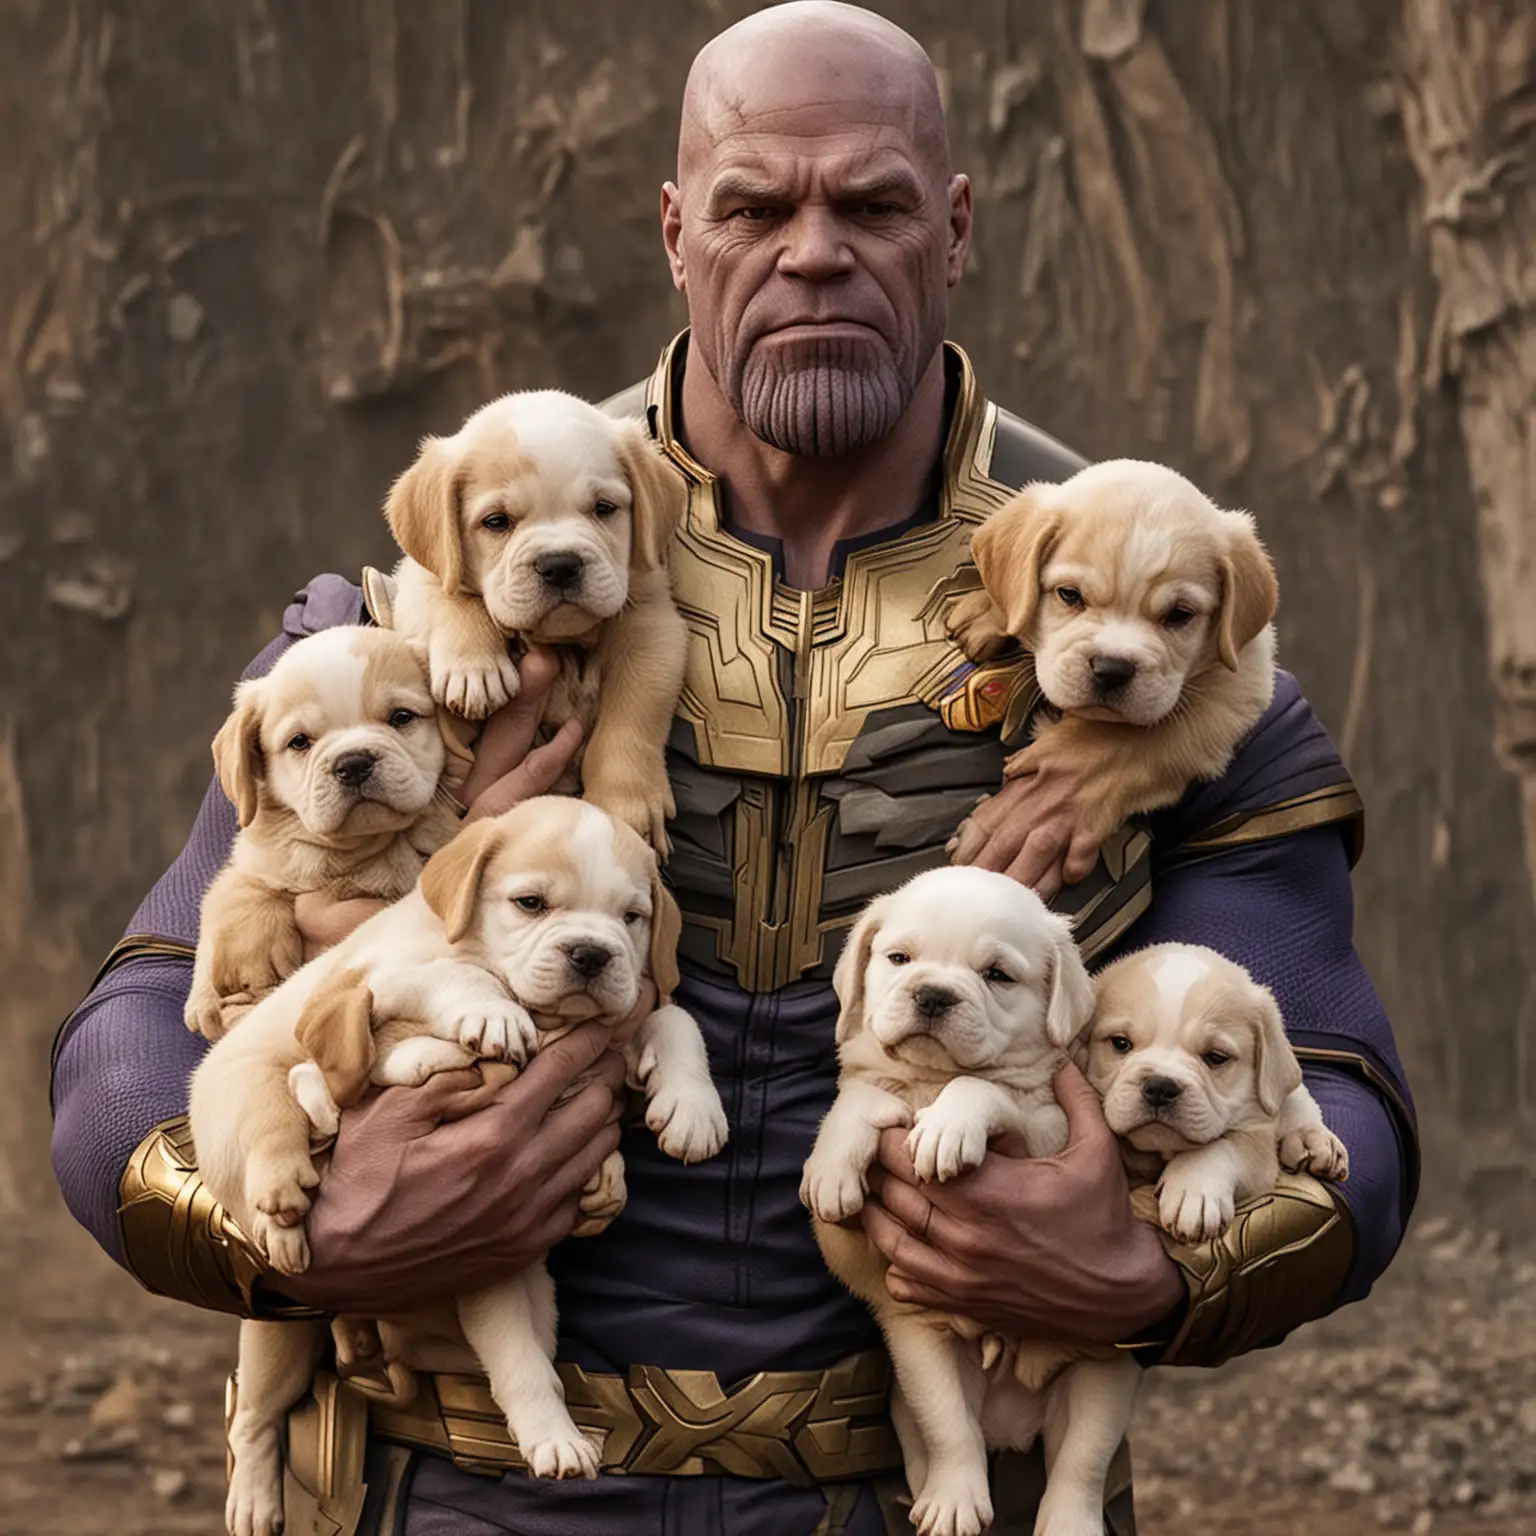 Thanos Holding Eight Puppies A Titans Tender Moment with Adorable Canine Companions